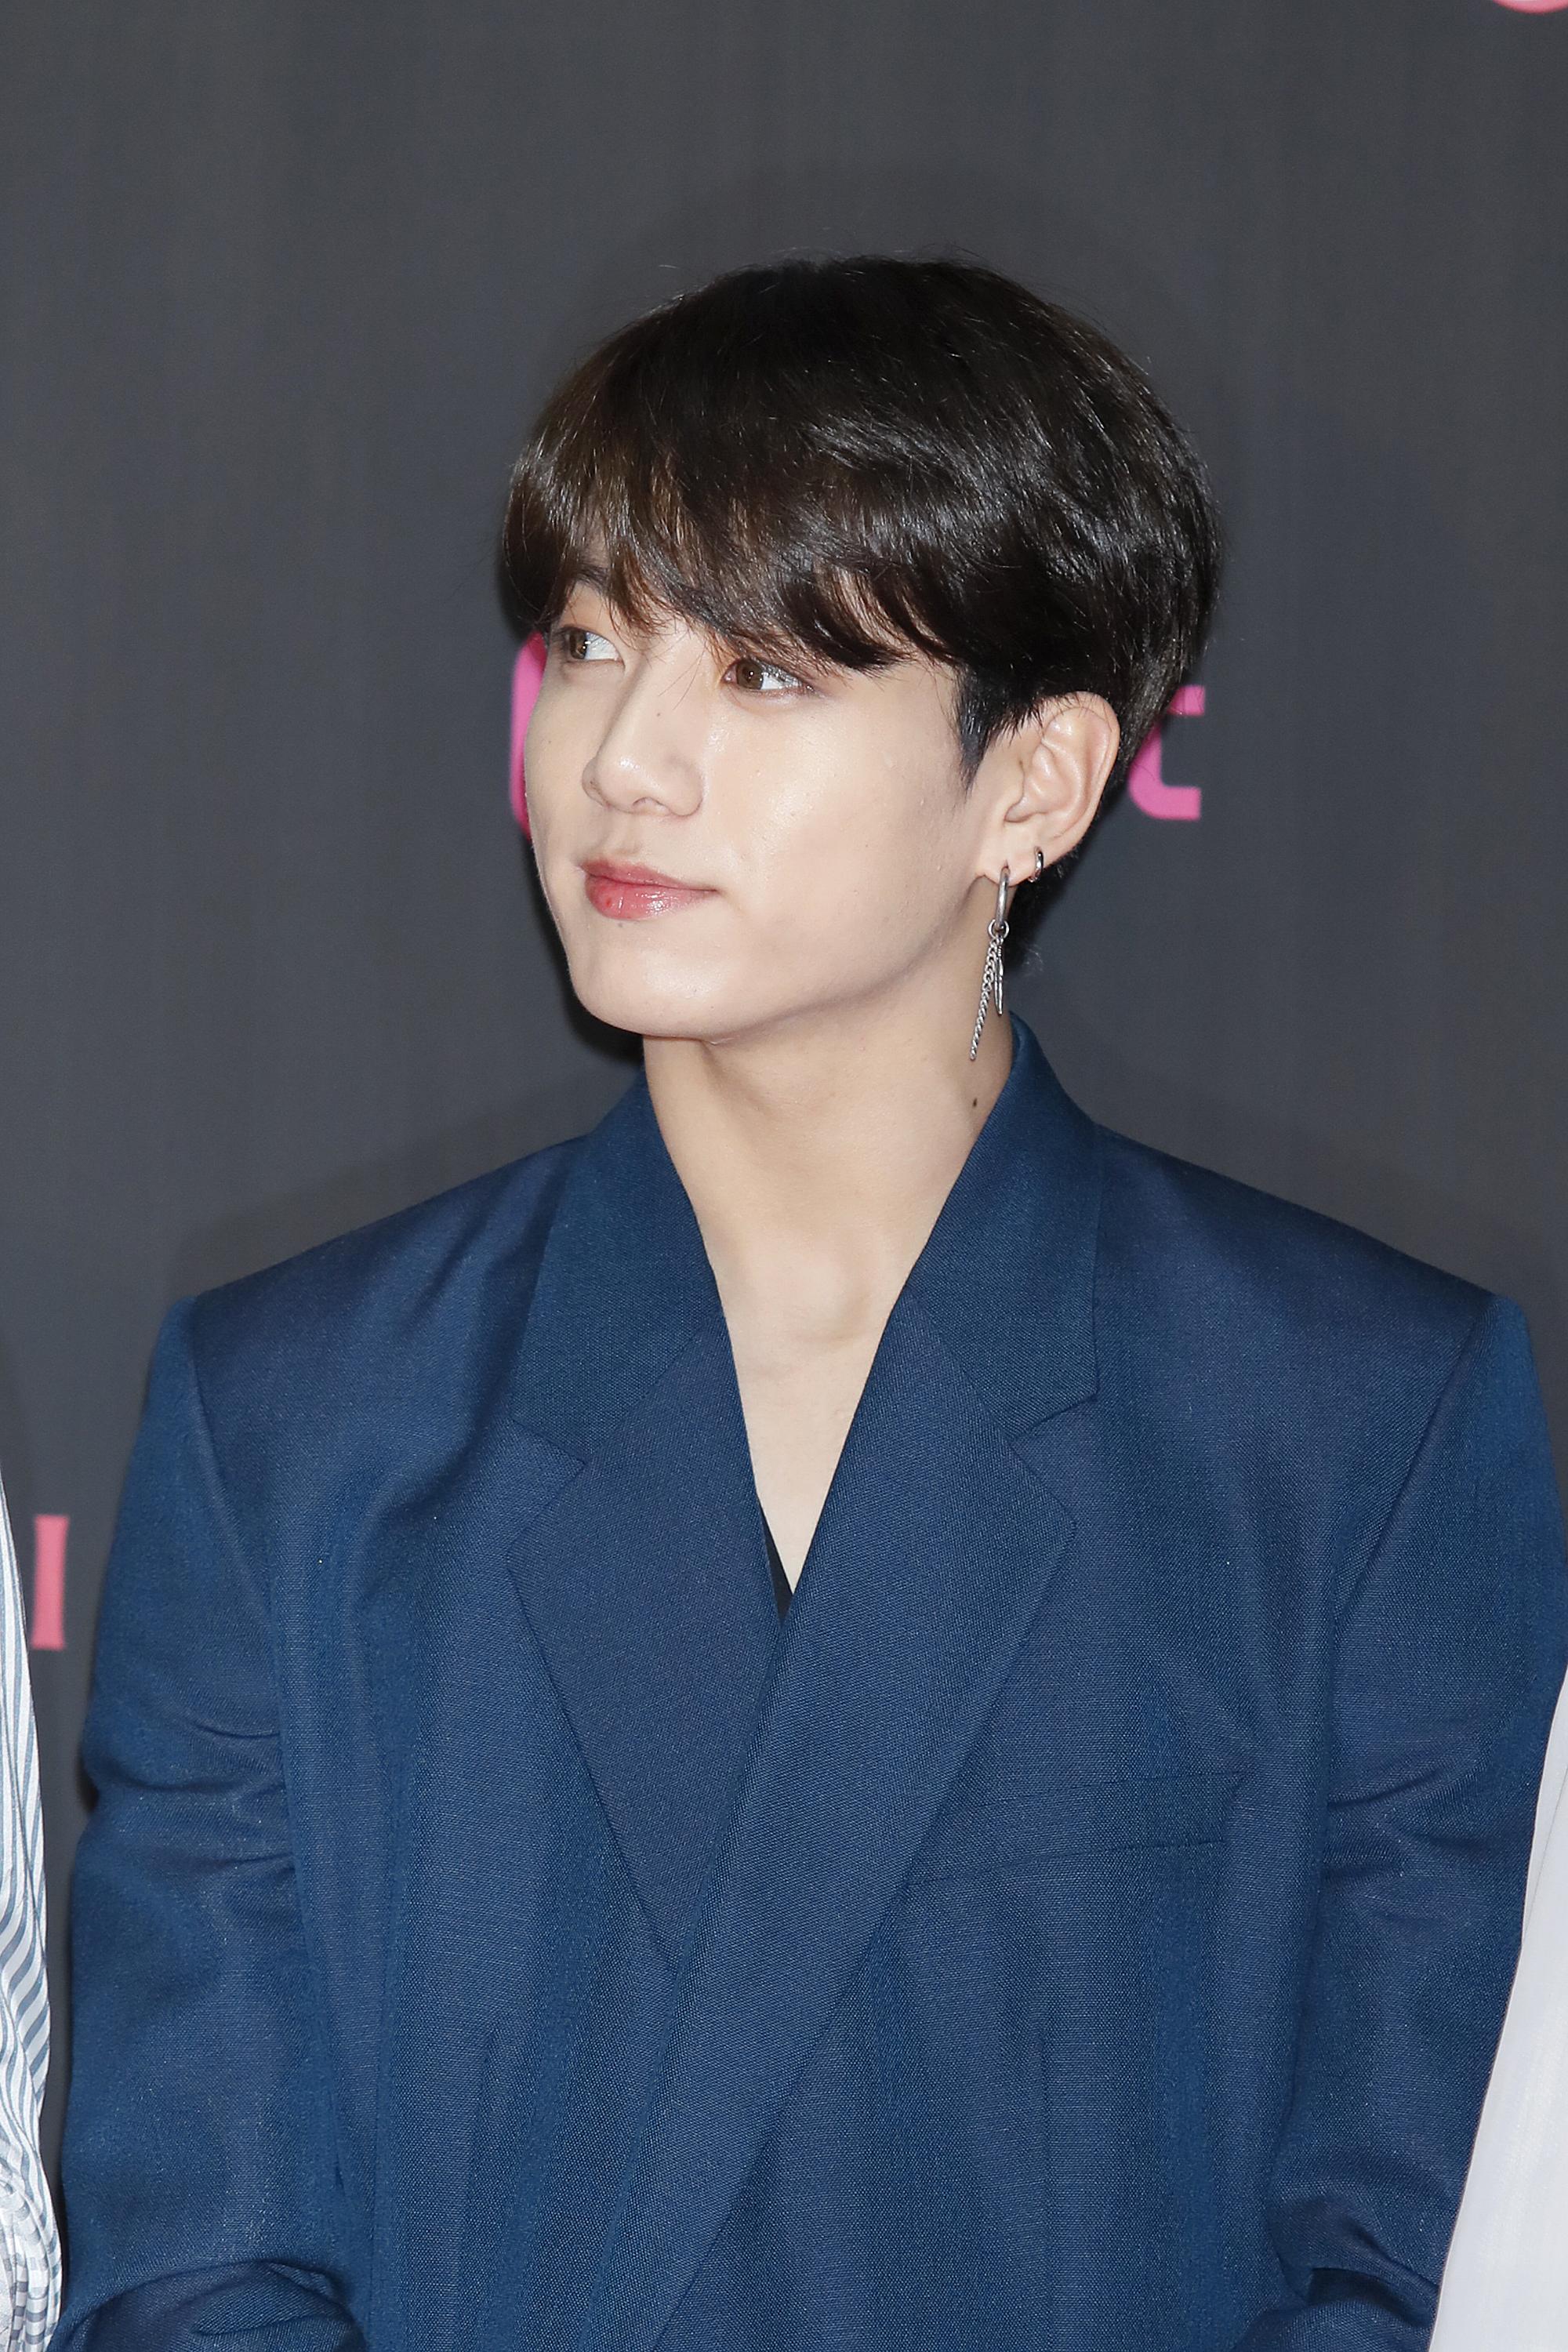 BTS' Jungkook's New Photo Of His Hair Shows It's Longer Than Ever